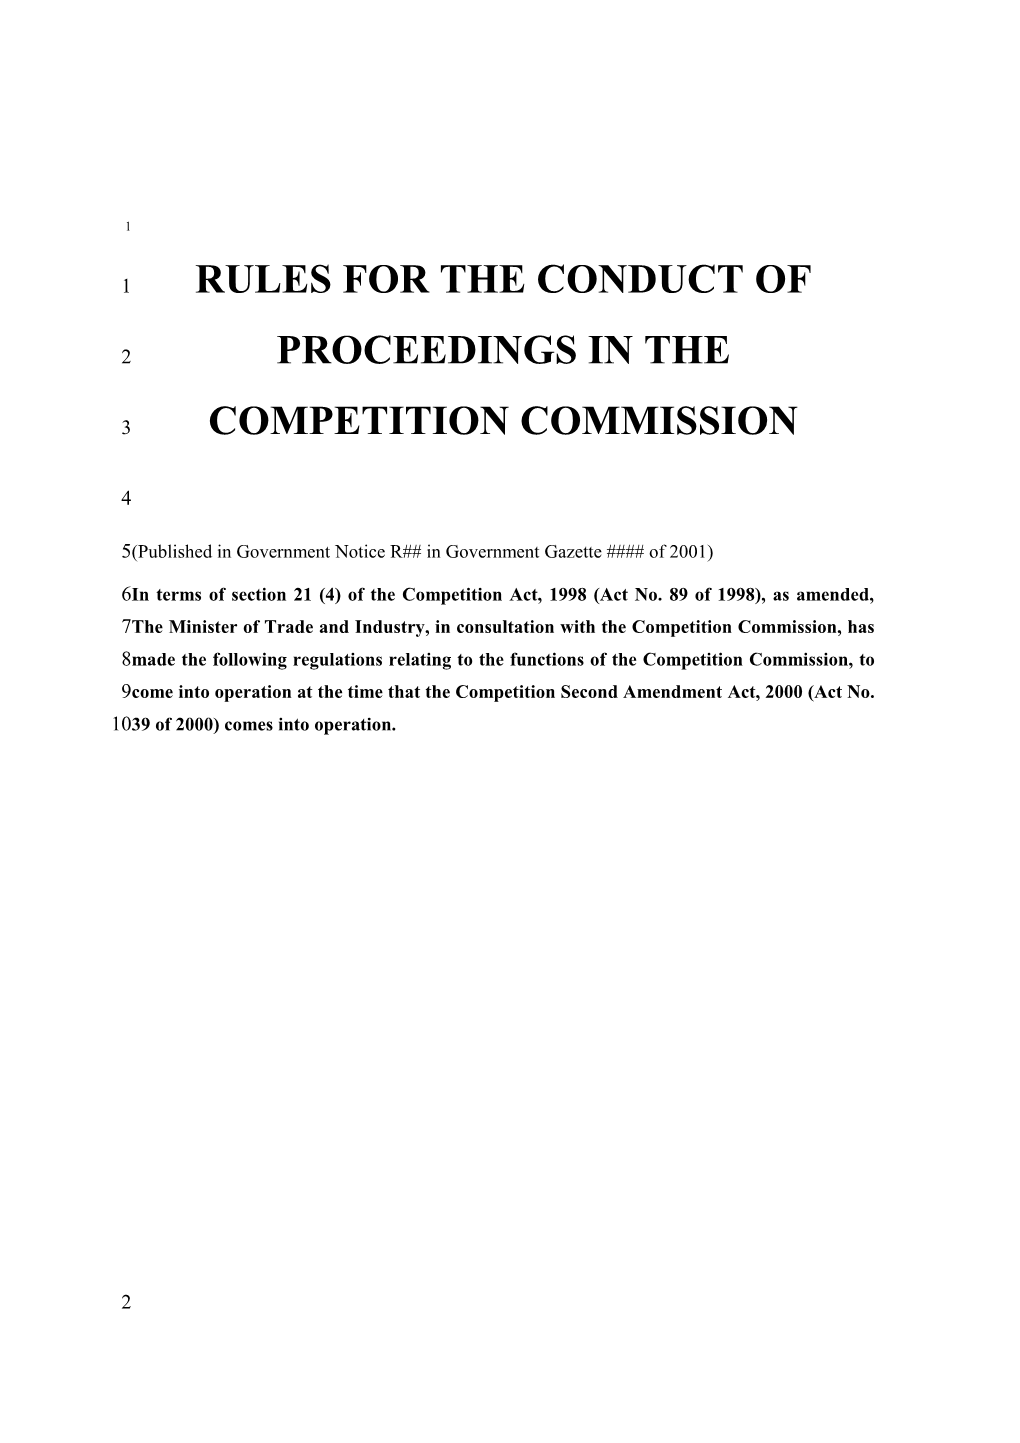 Rules for the Conduct of Proceedings in the Competition Commission